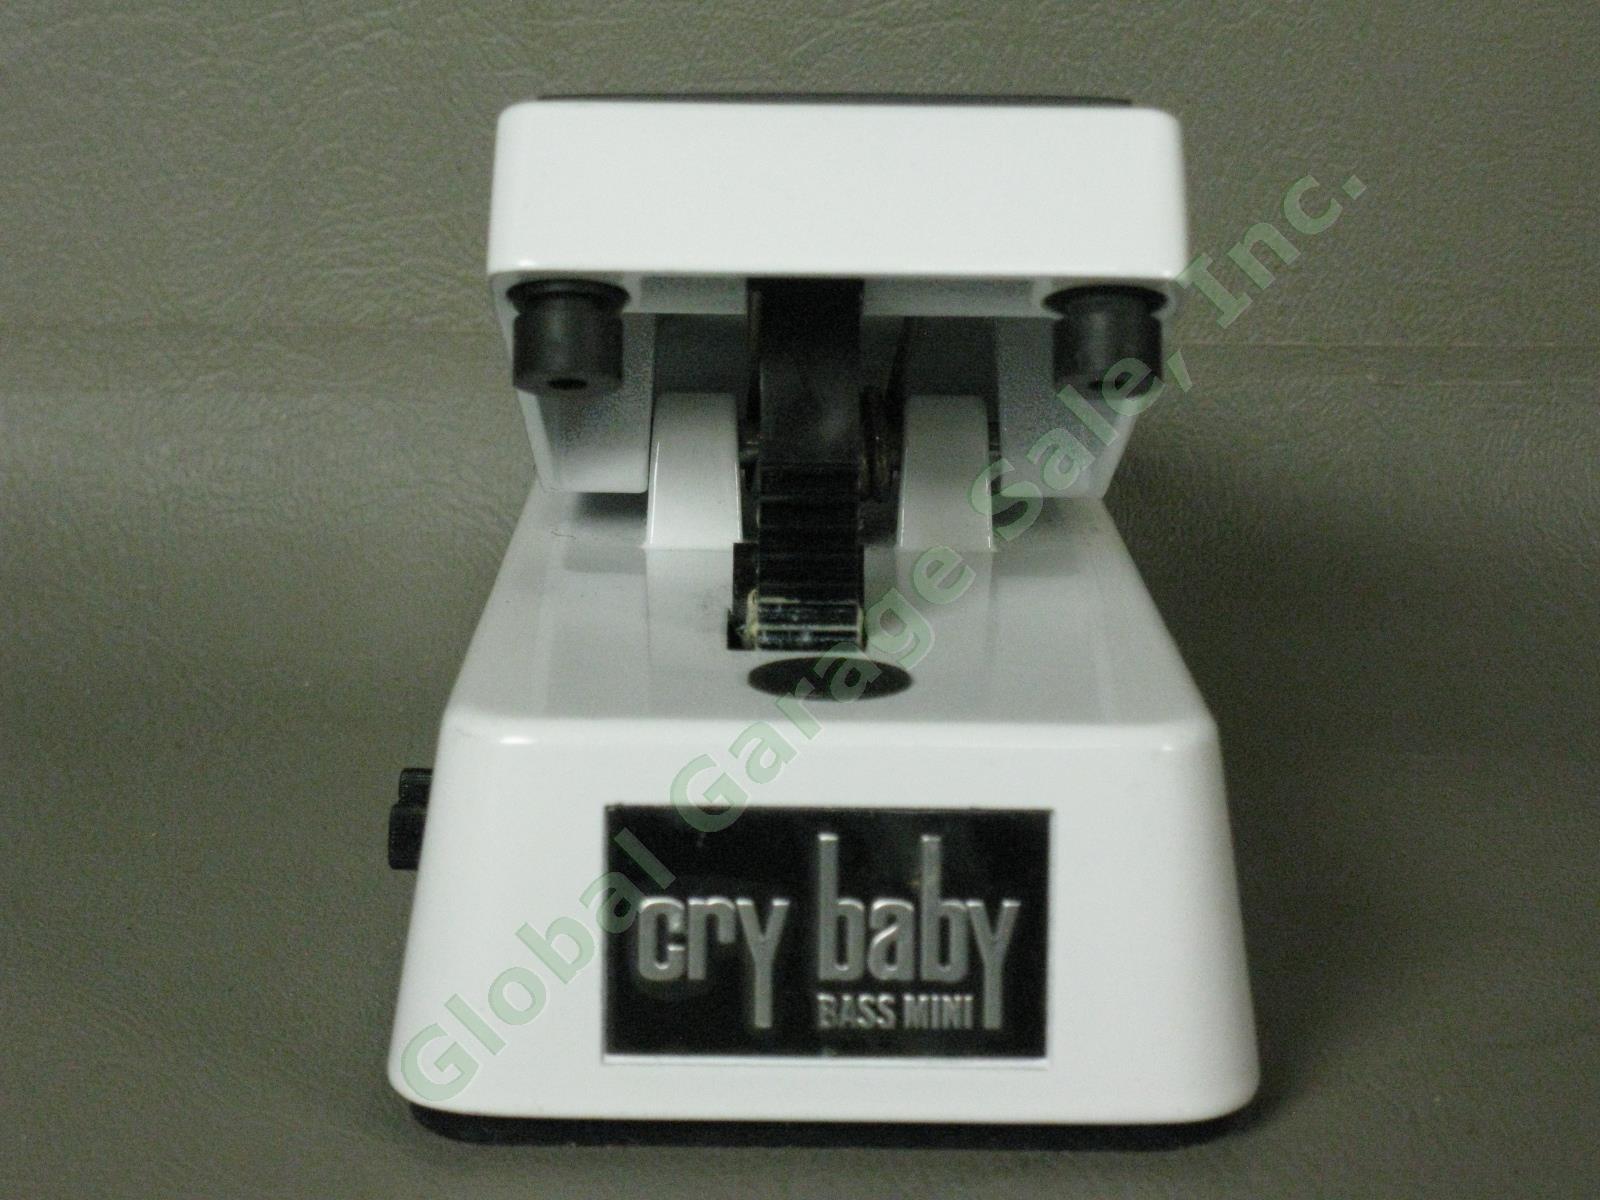 New In Box Dunlop Cry Baby Bass Mini Wah Guitar Effects Pedal CBM105Q White 4